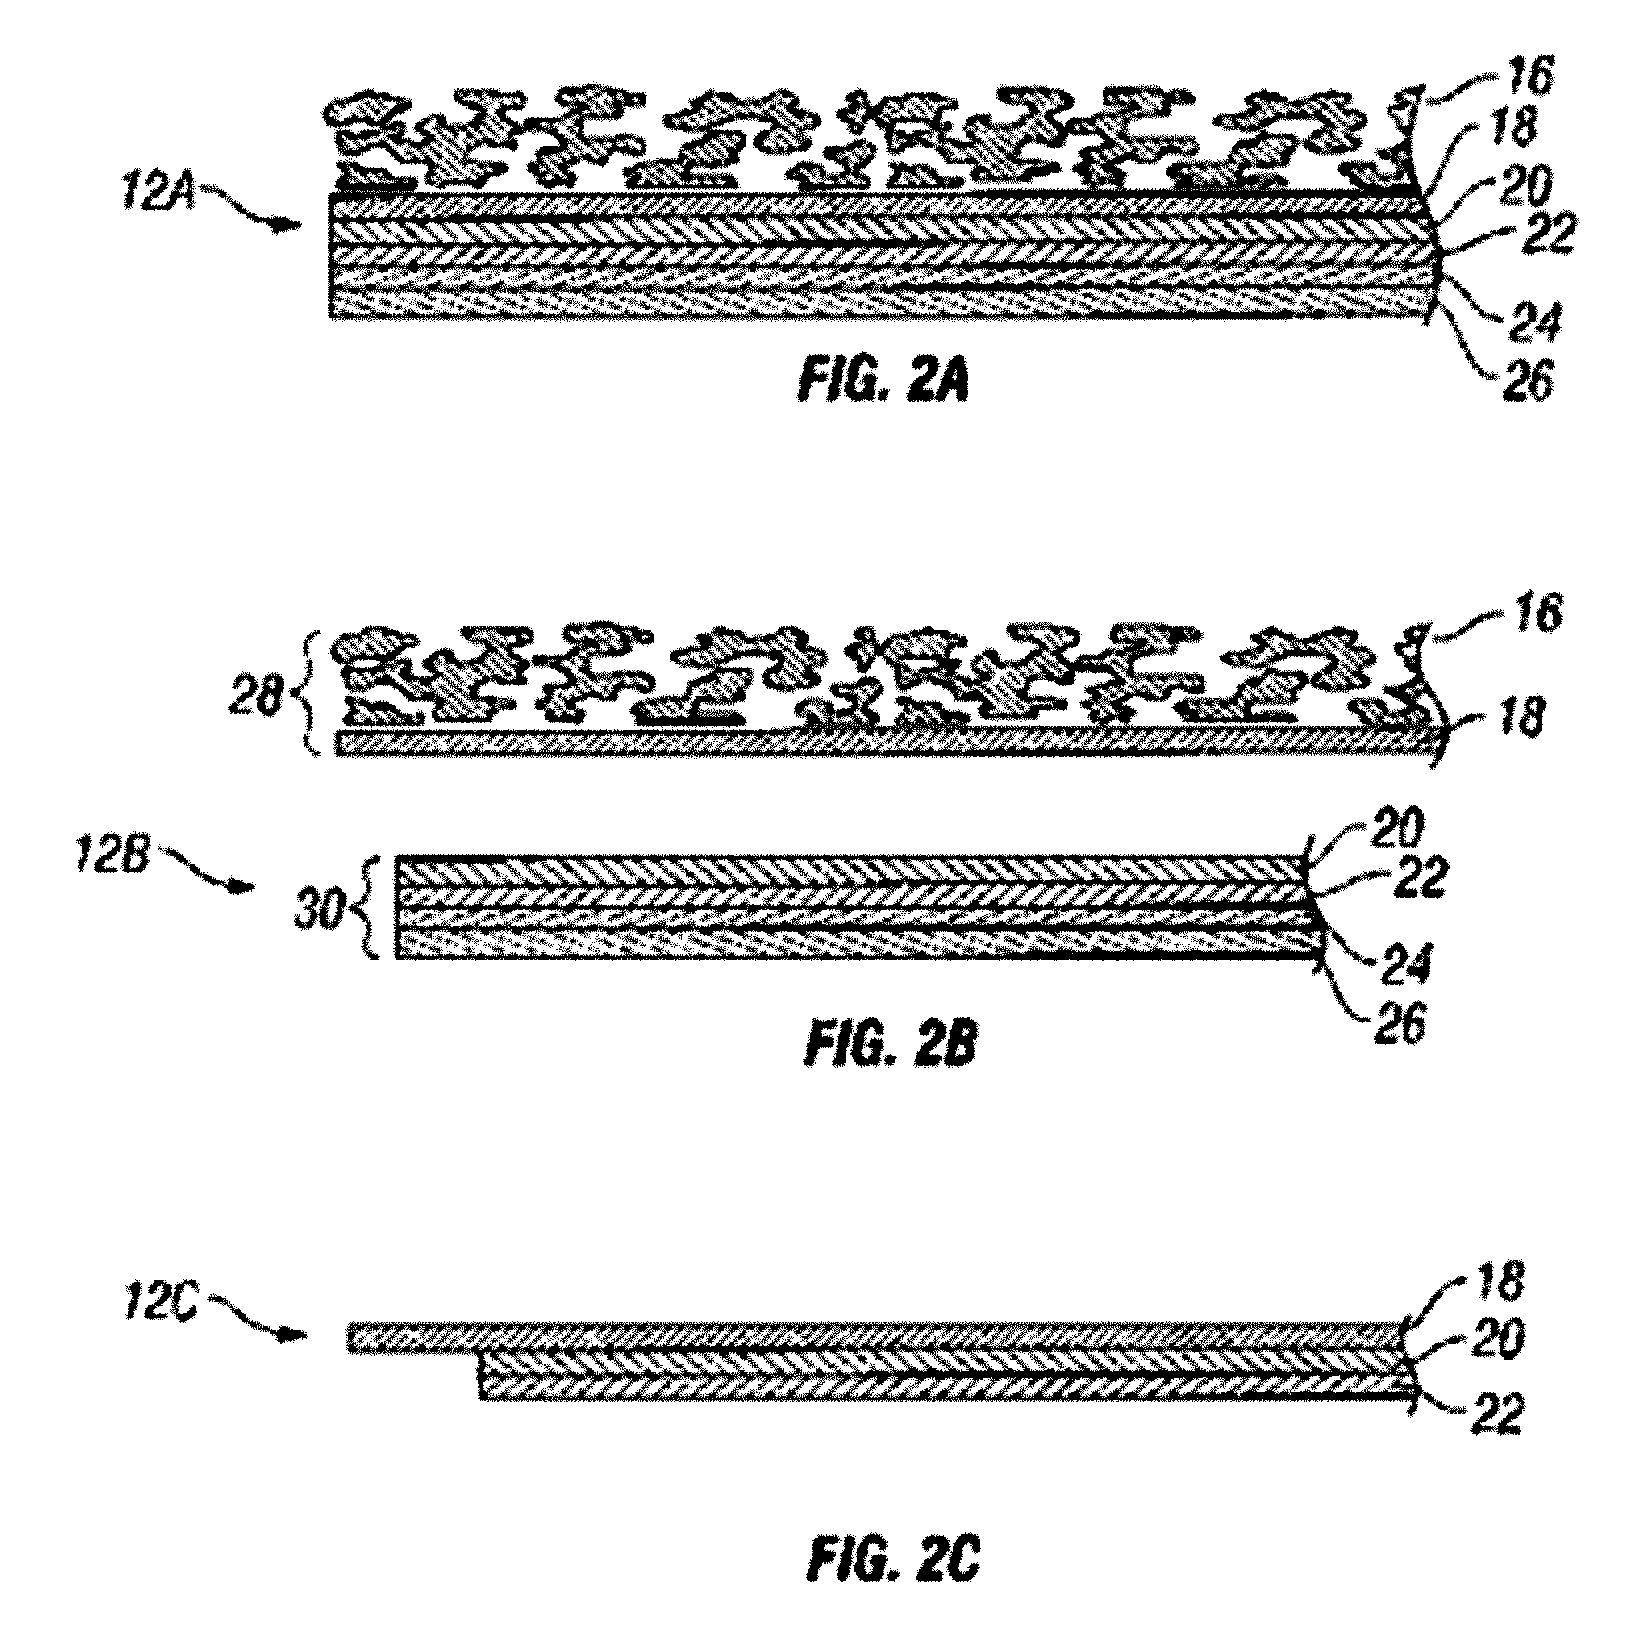 Systems and methods for manufacture of an analyte-measuring device including a membrane system